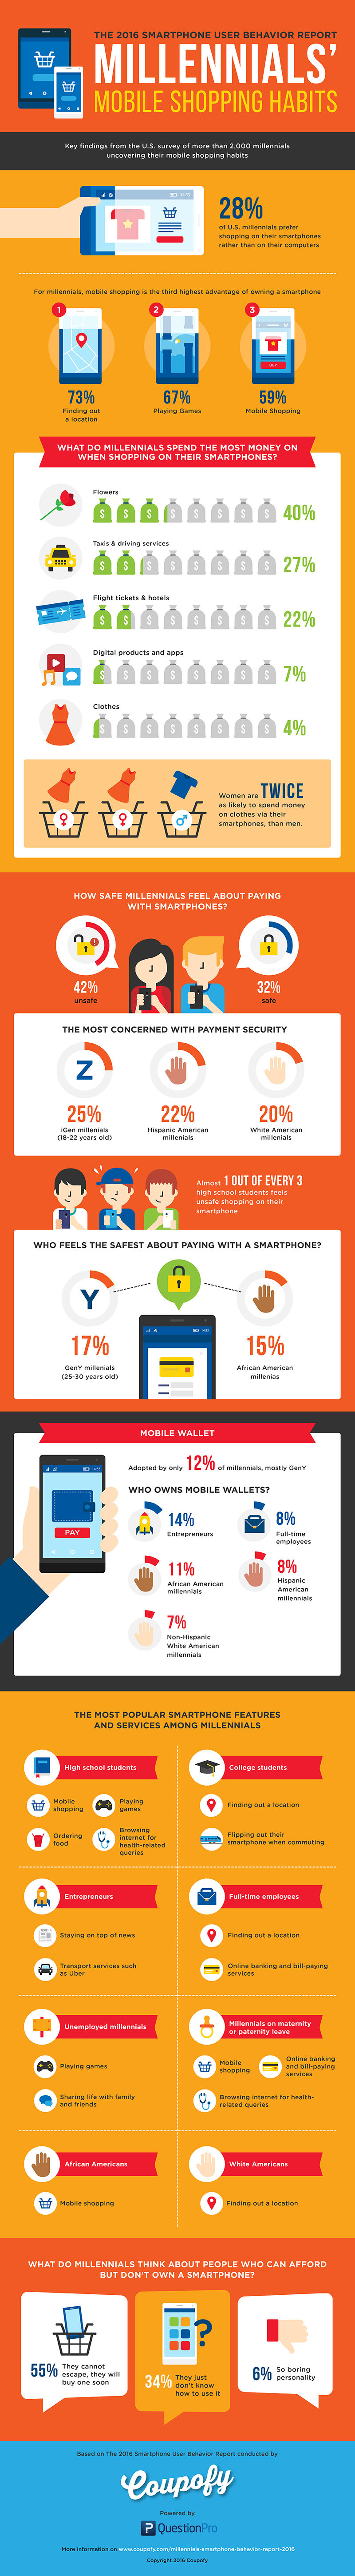 Mobile shopping habits - infographic by Shopify